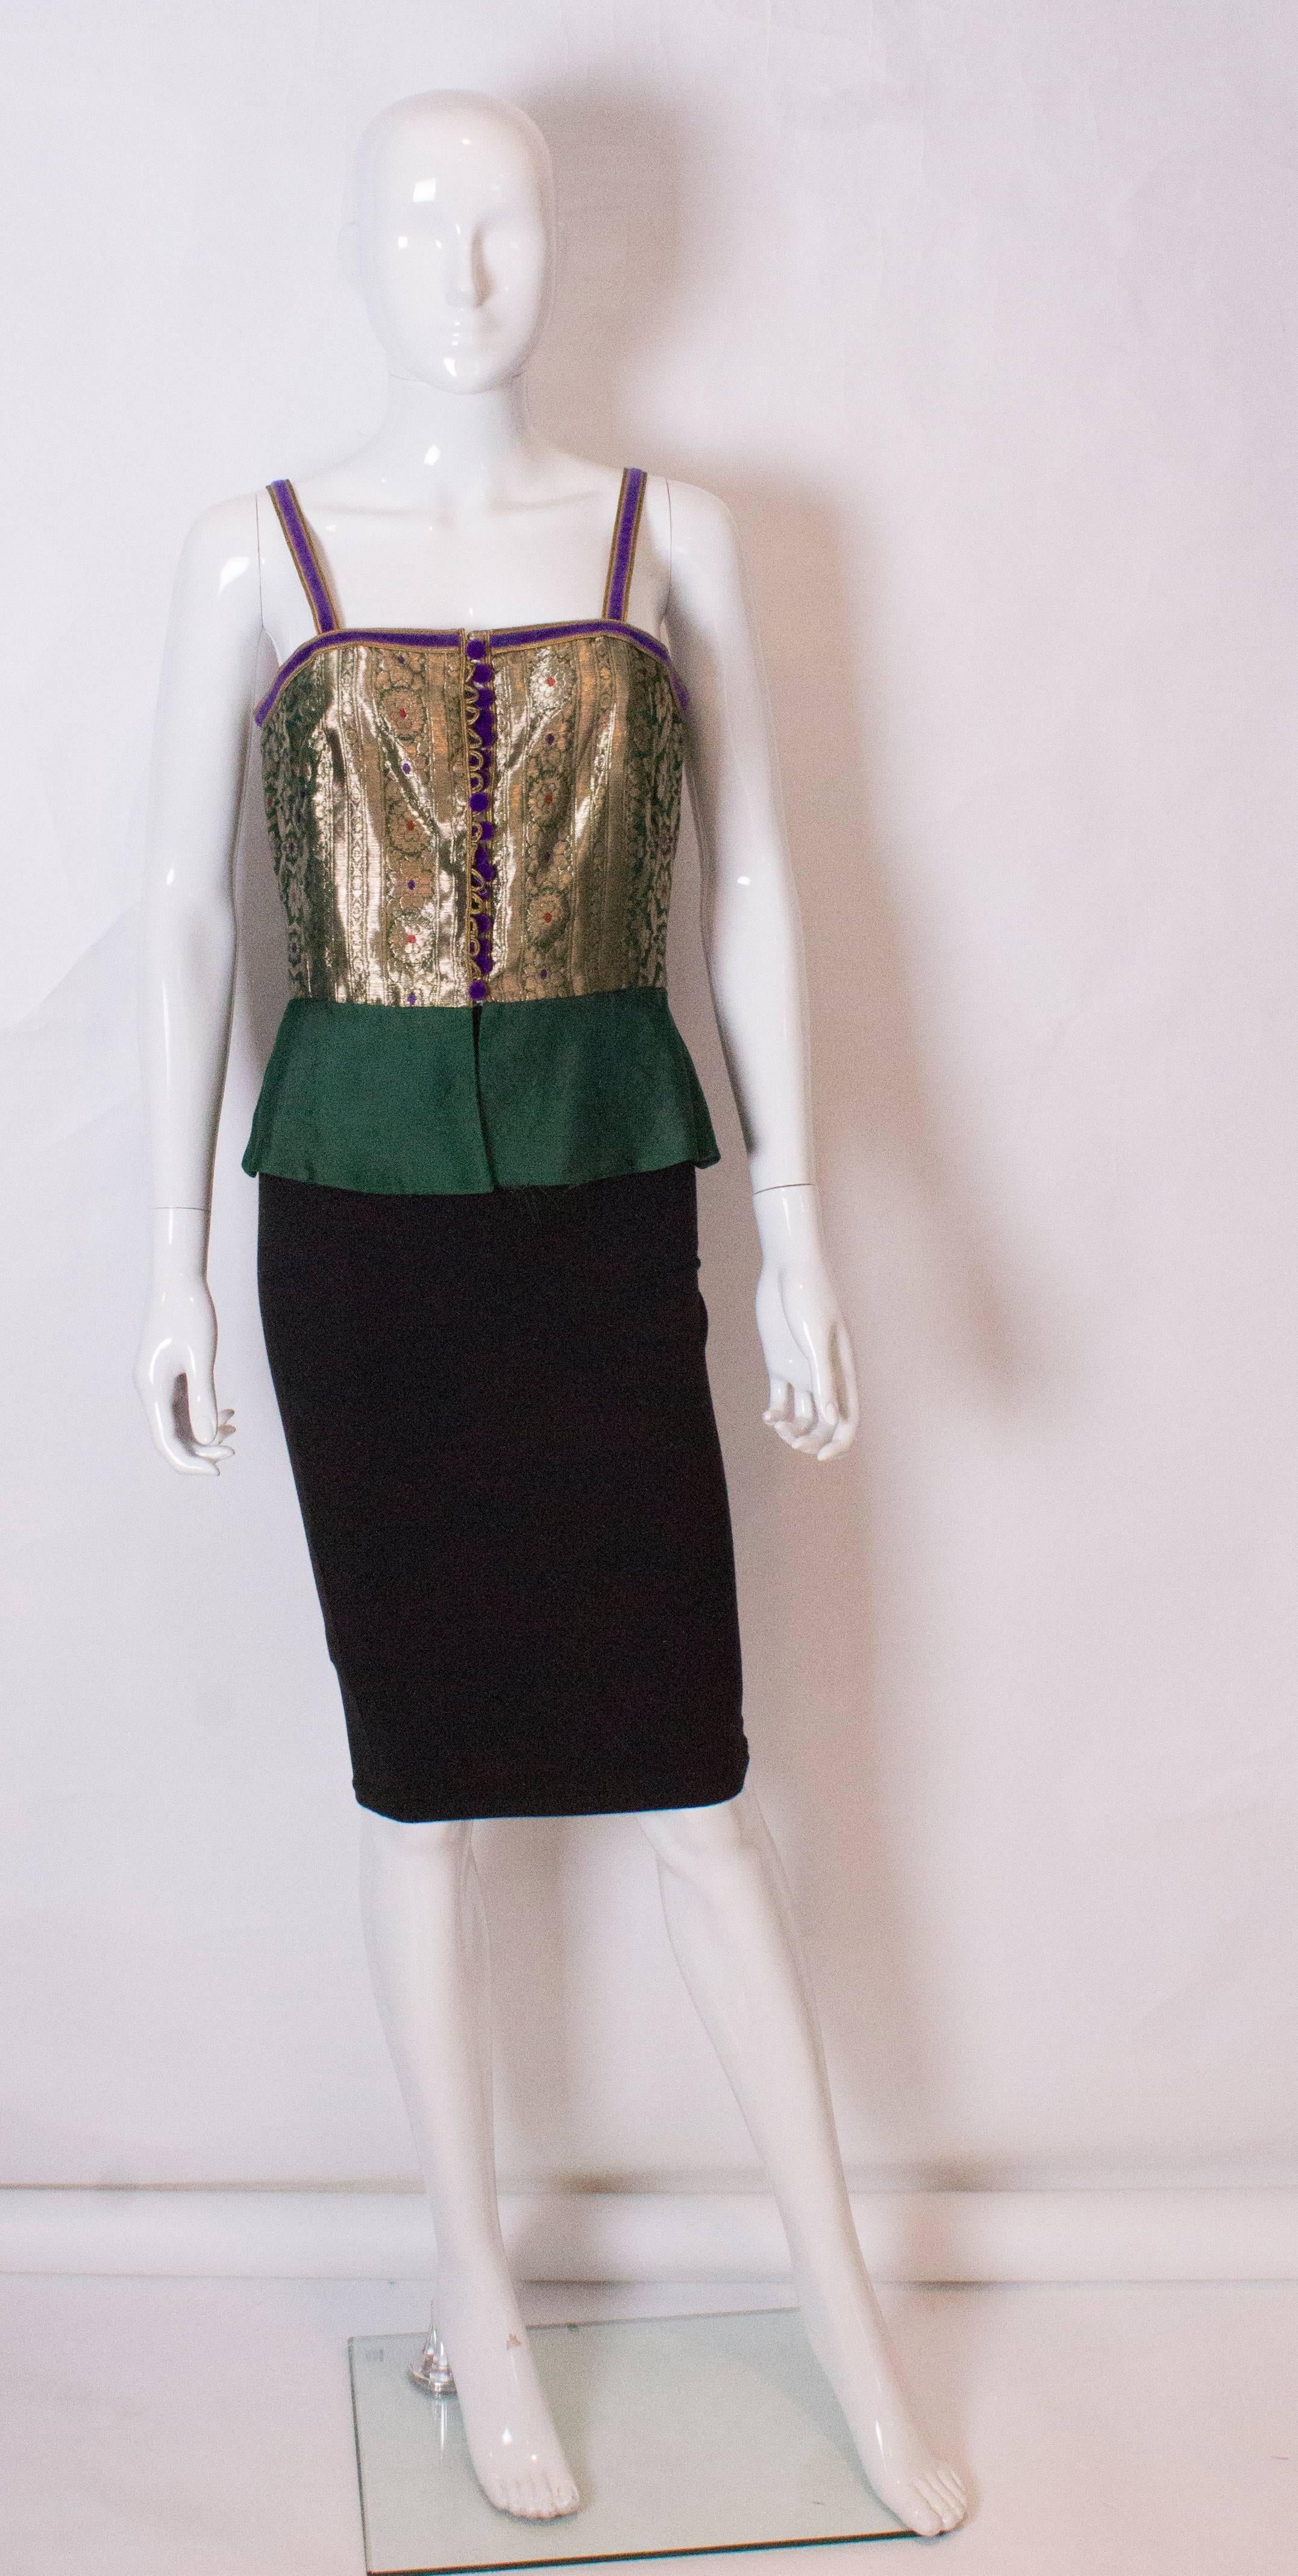 A chic bodice by Regamus London. The body of the bodice is gold lame with a floral print and velvet trim, shoulder straps and buttons.It has a 5'' deep green peplum, and is fully lined.